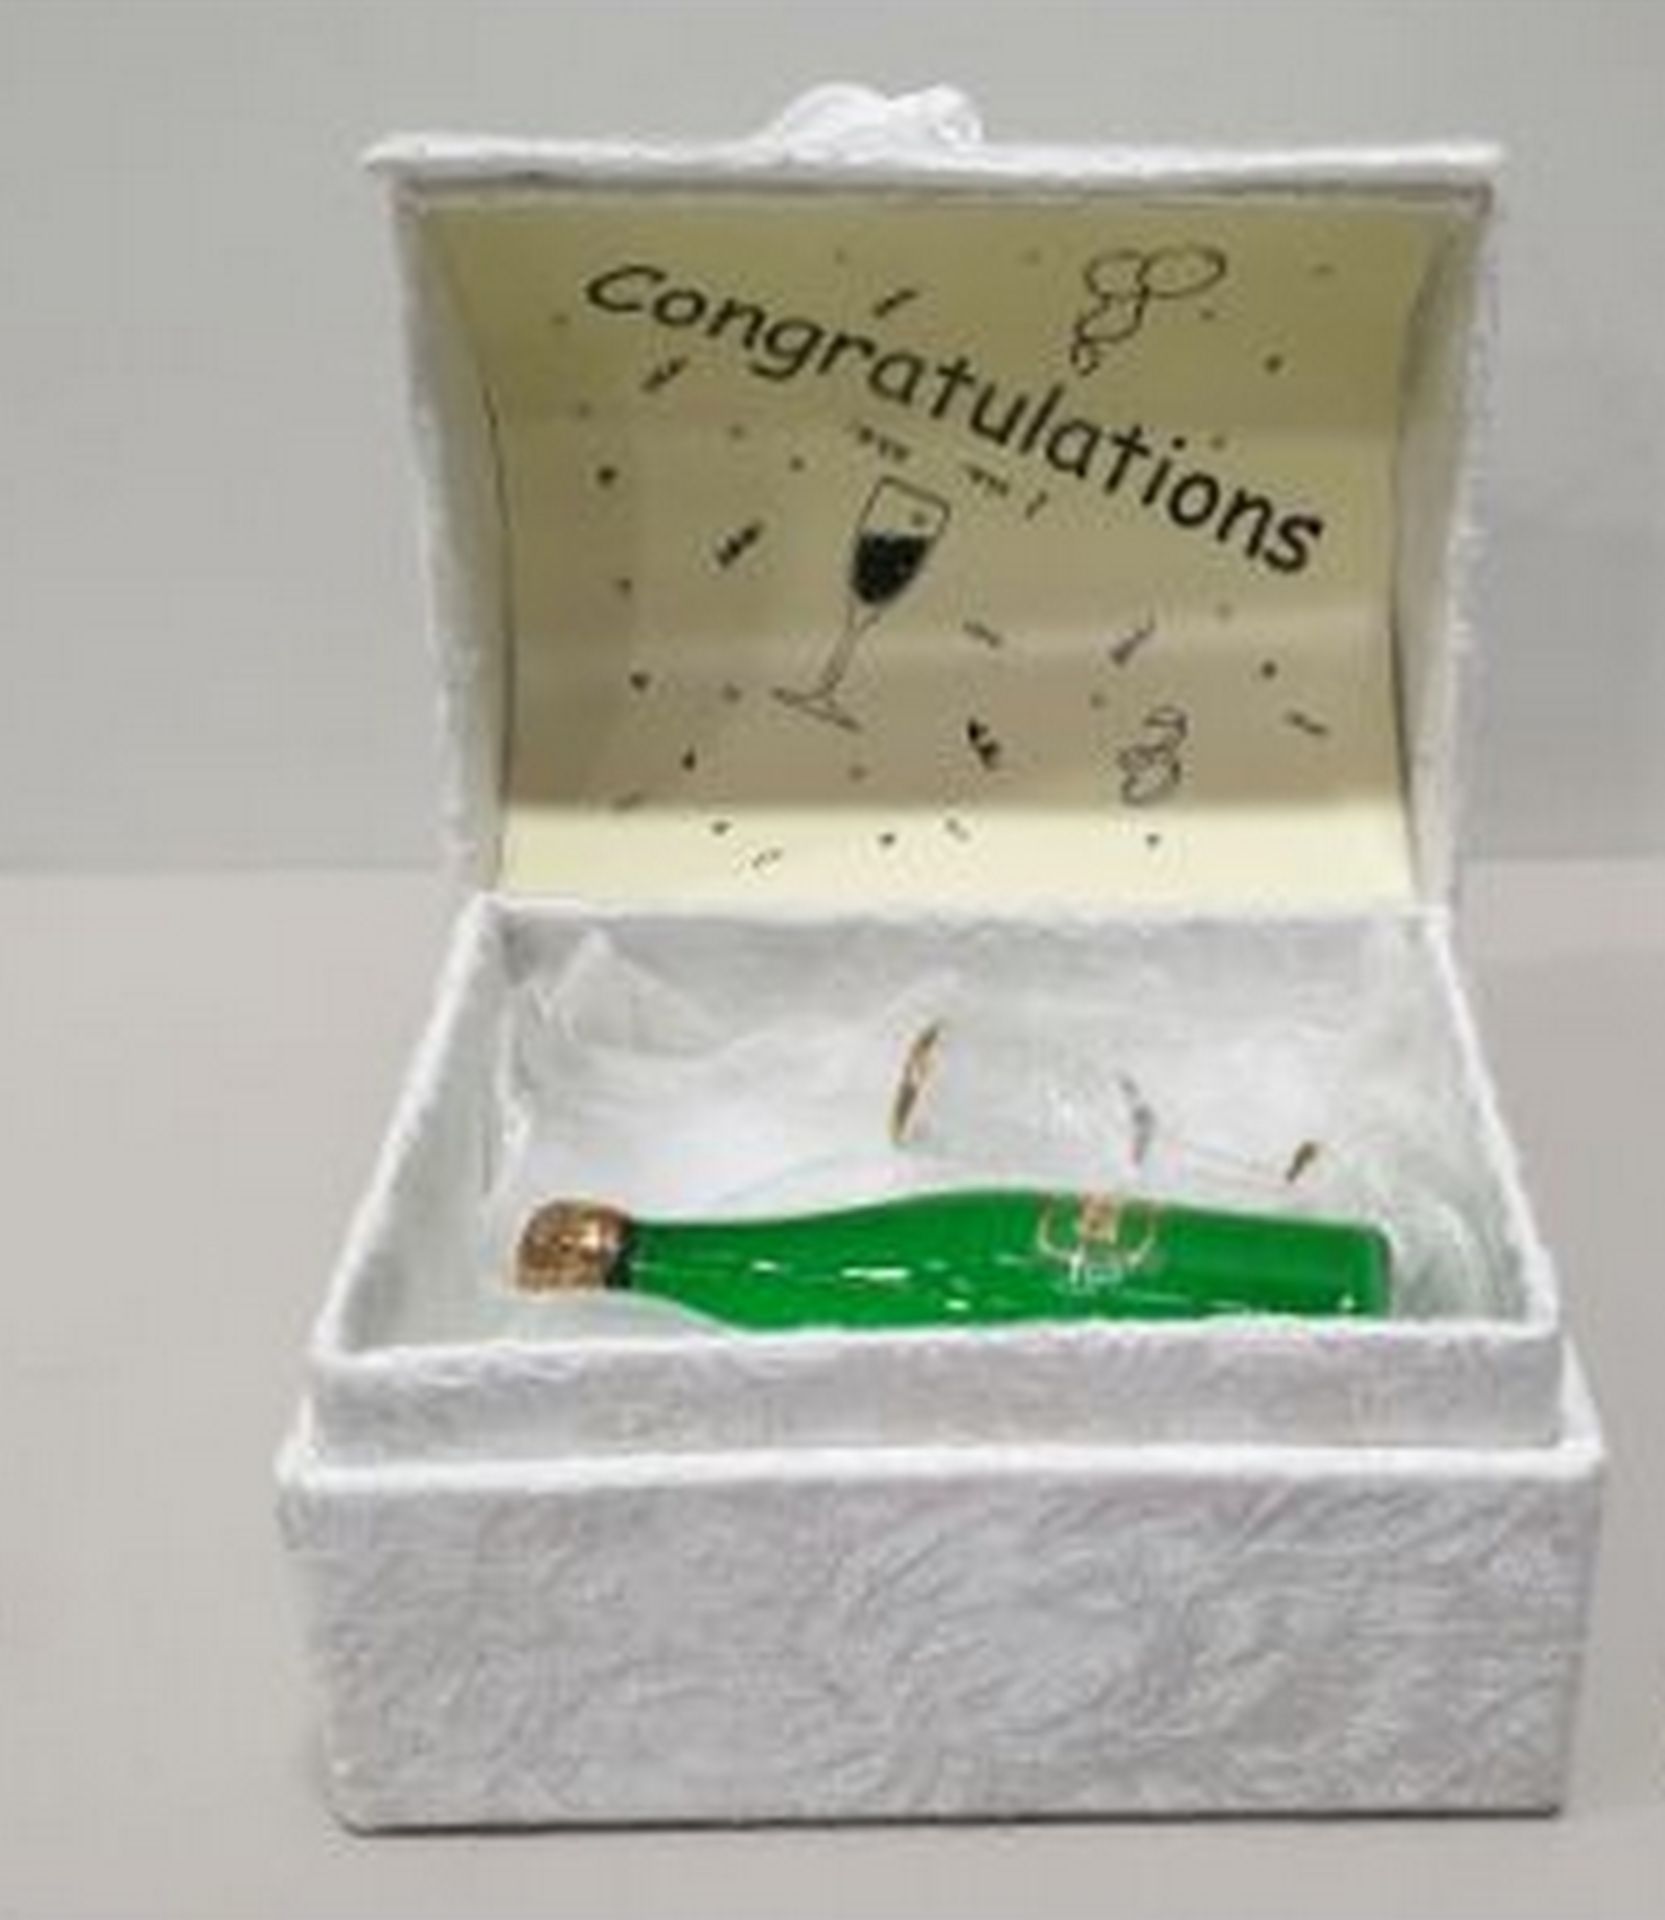 10 x congratulation box with champagne bottle and glass - Image 3 of 3